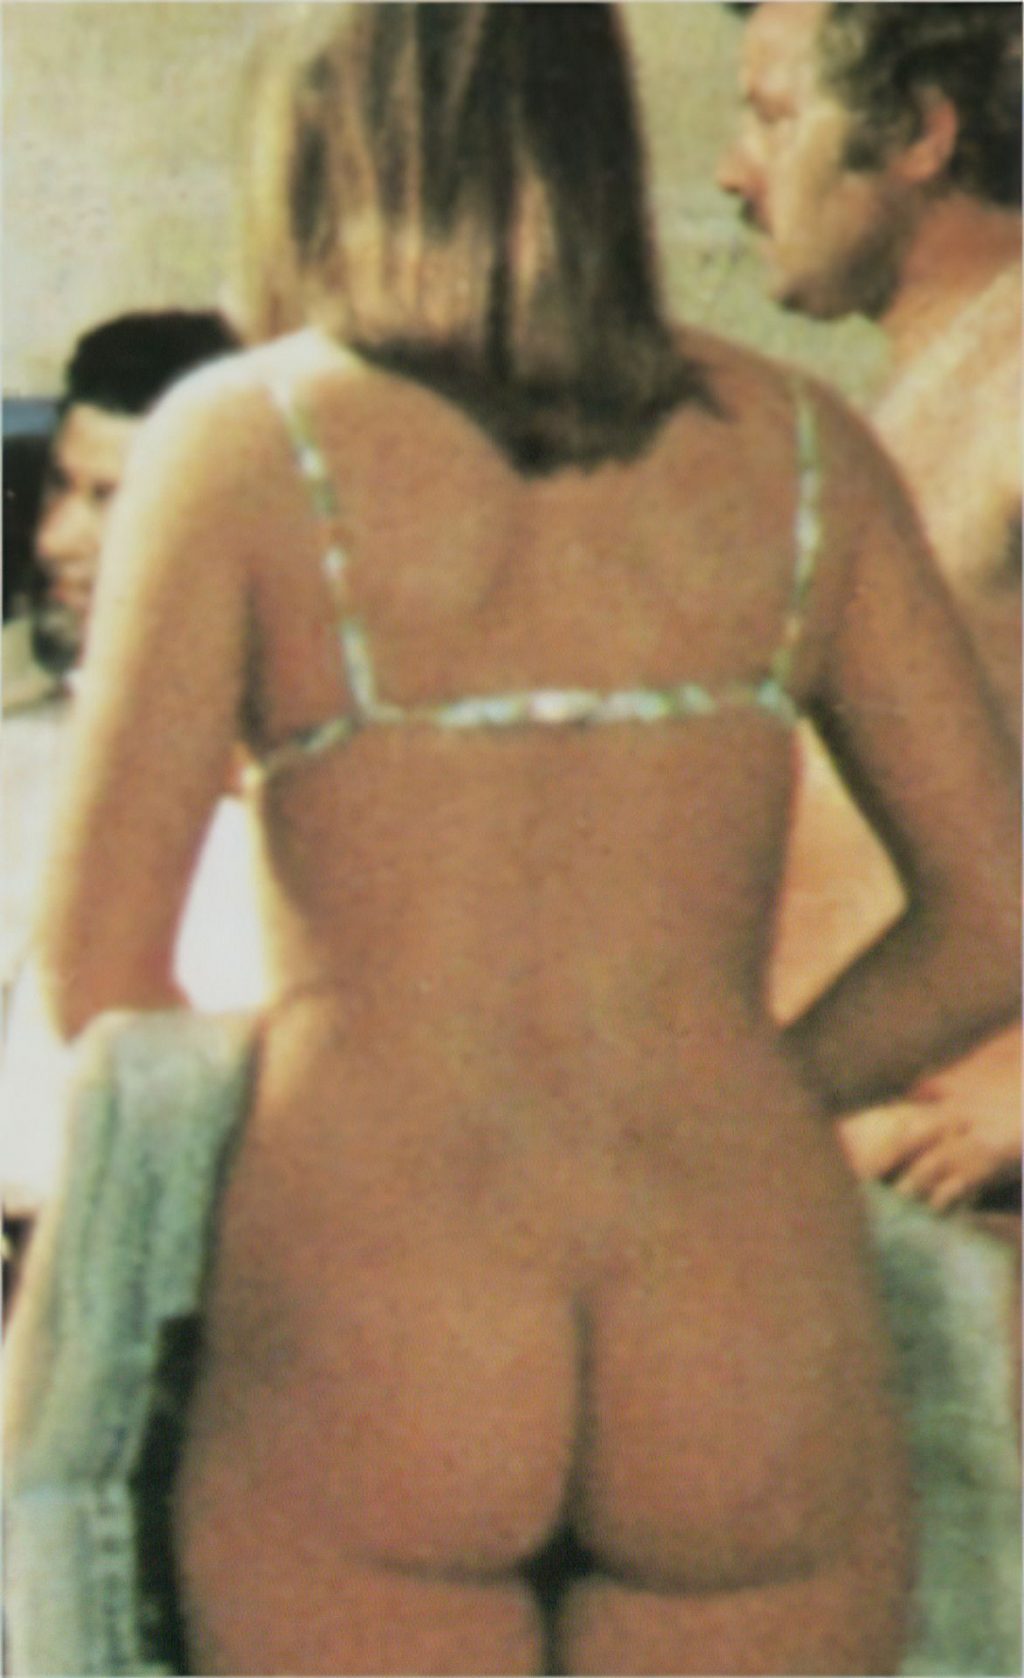 Naked jodie foster